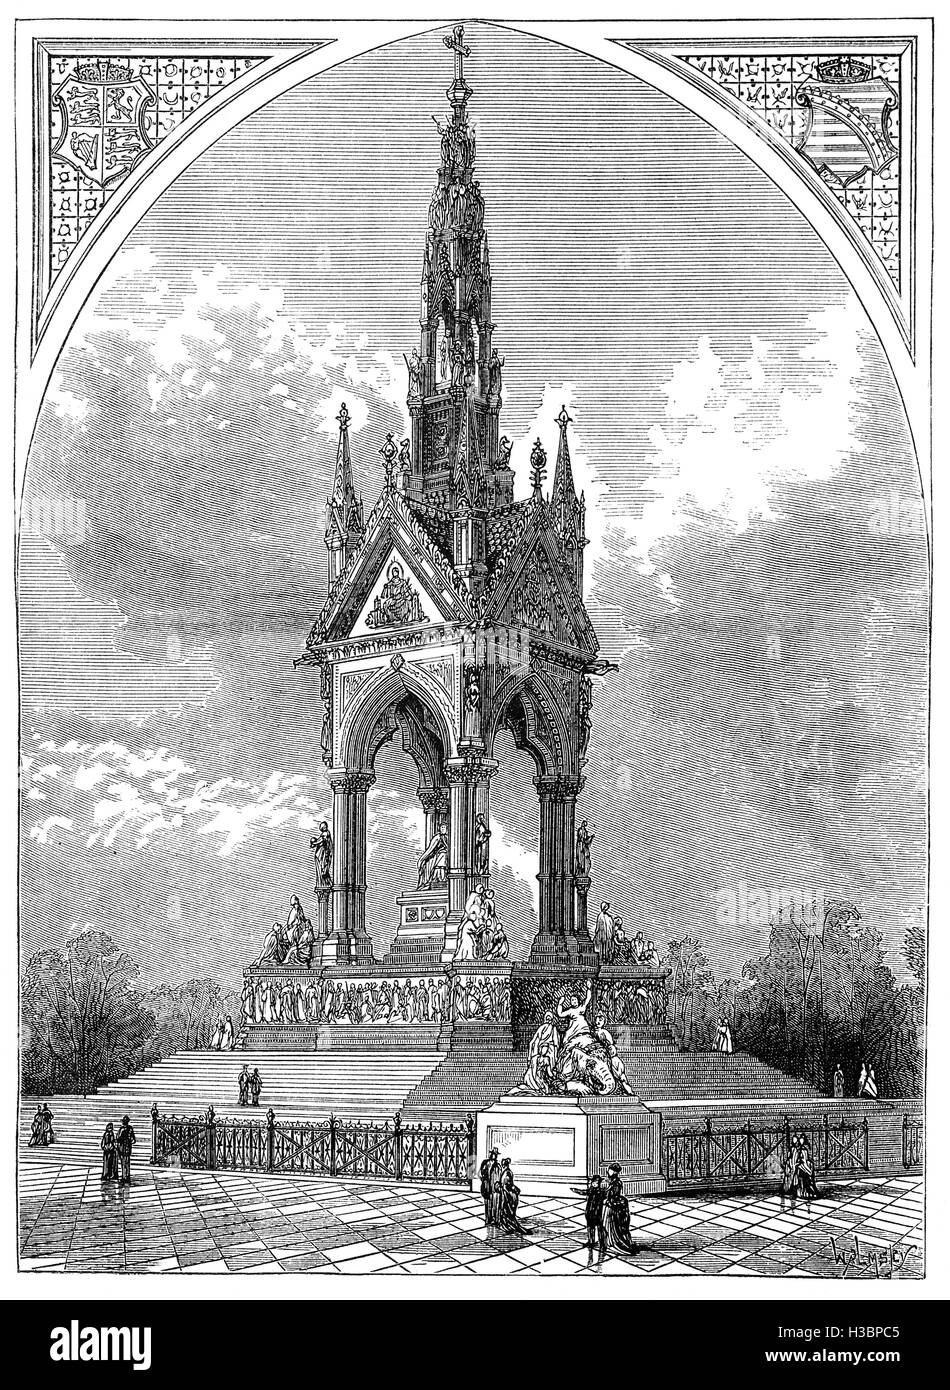 The Albert Memorial is situated in Kensington Gardens, was commissioned by Queen Victoria in memory of her beloved husband, Prince Albert who died of typhoid in 1861. The memorial was designed by Sir George Gilbert Scott in the Gothic Revival style and opened in July 1872 by Queen Victoria in 1875. Stock Photo